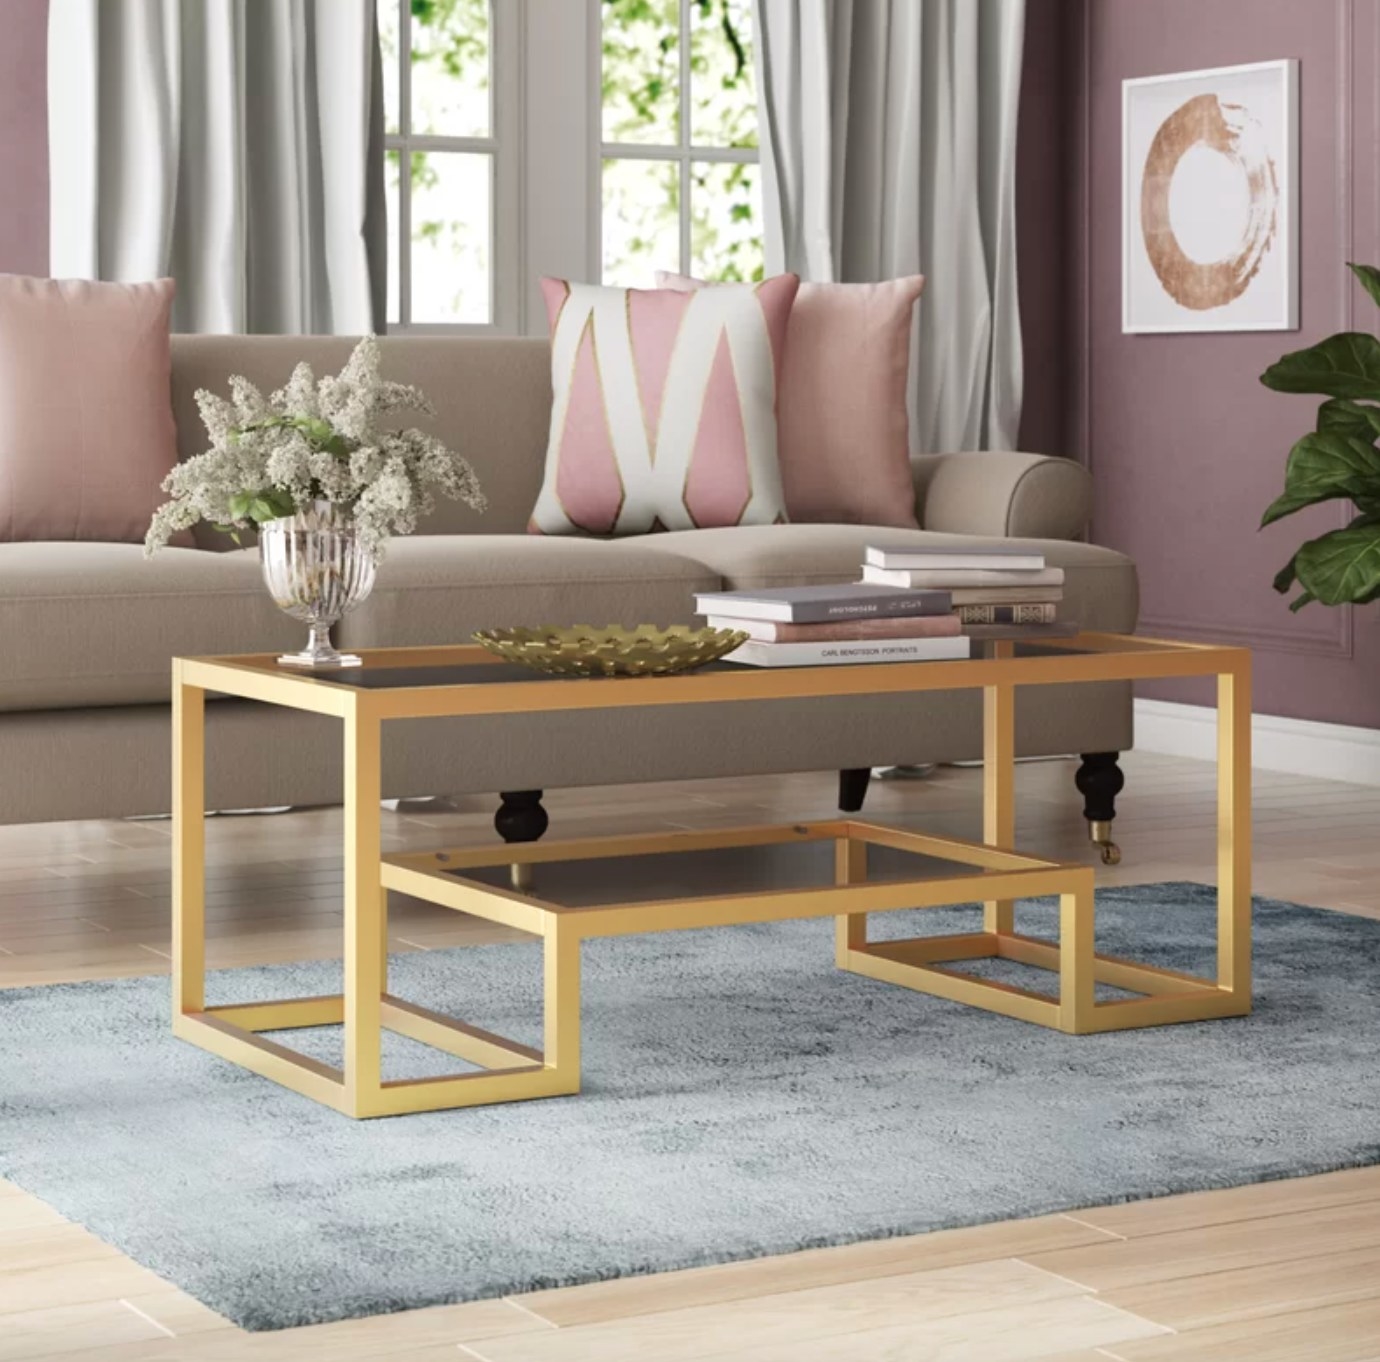 31 Splurge-Worthy Pieces Of Furniture From Wayfair That You’ll Simply ...